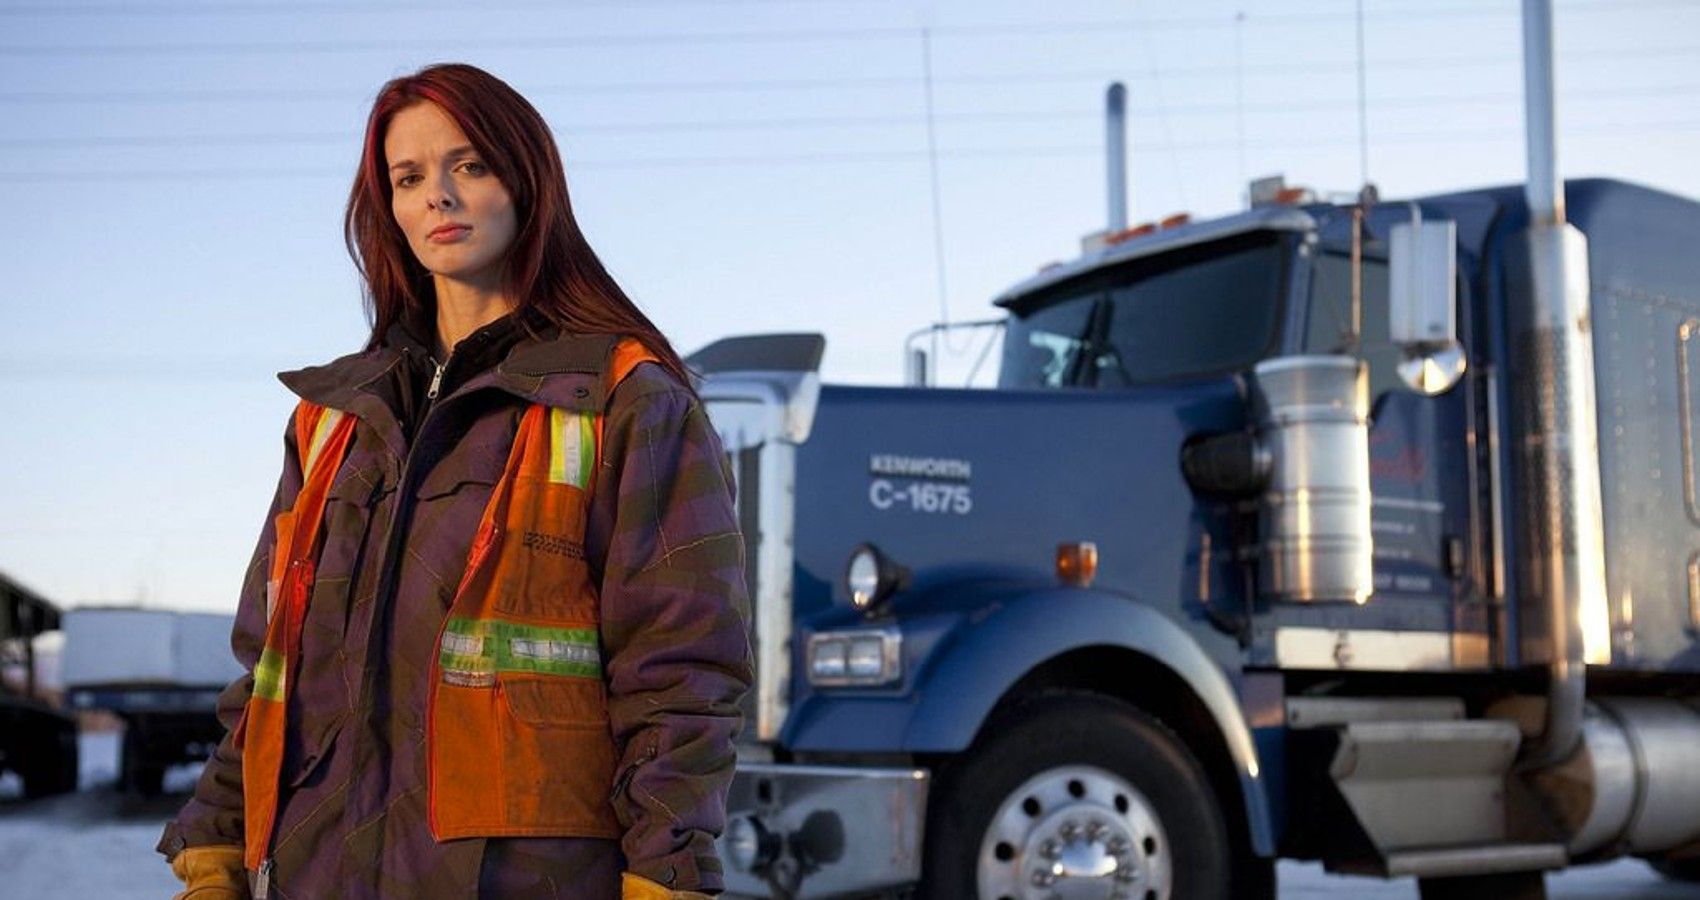 Lisa Kelly posing with a truck